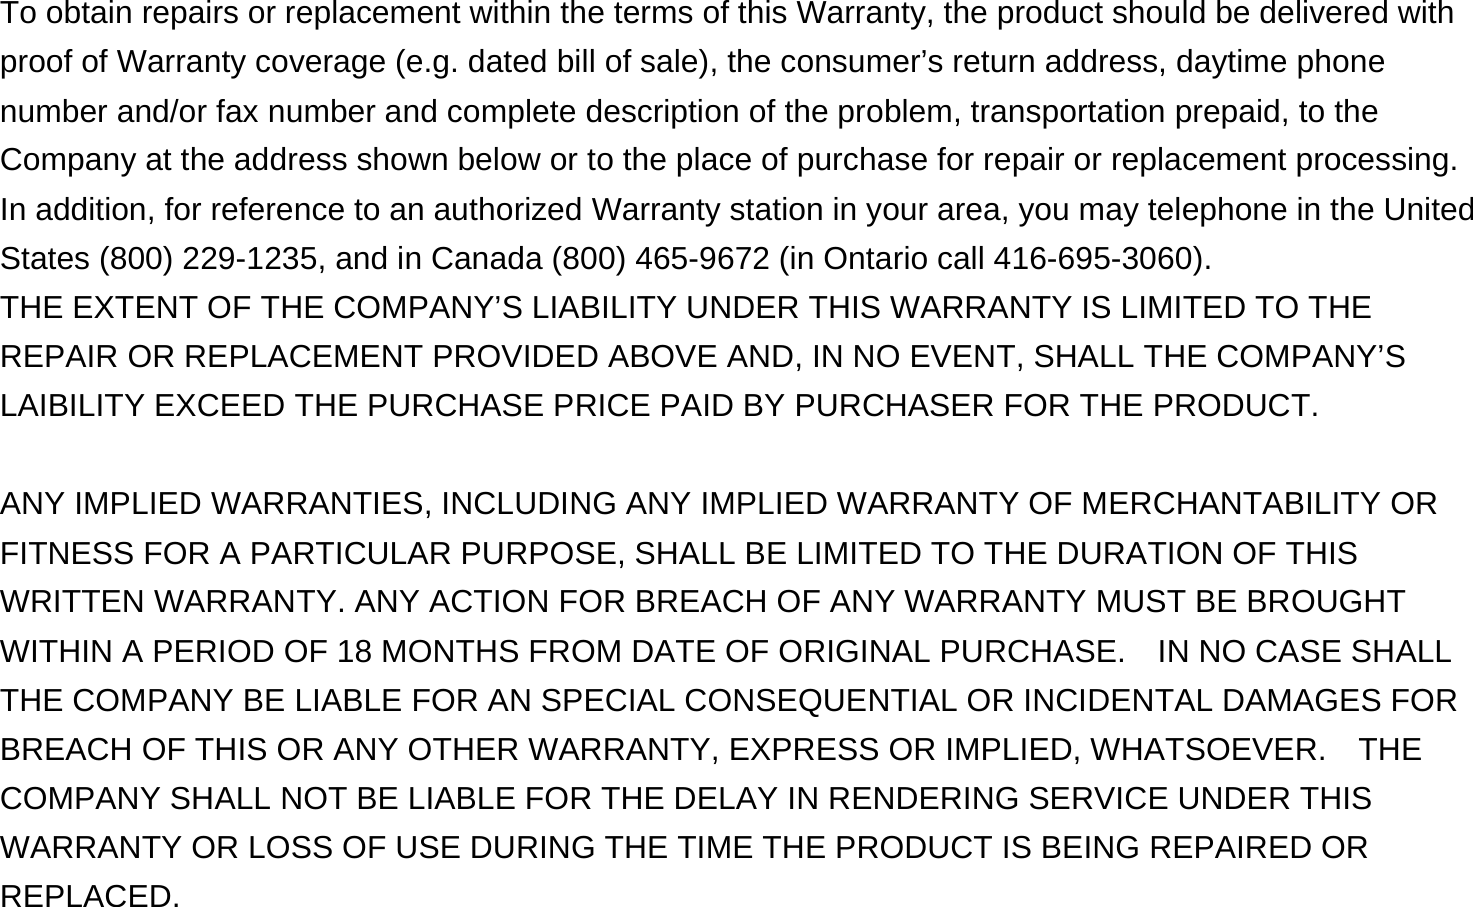  To obtain repairs or replacement within the terms of this Warranty, the product should be delivered with proof of Warranty coverage (e.g. dated bill of sale), the consumer’s return address, daytime phone number and/or fax number and complete description of the problem, transportation prepaid, to the Company at the address shown below or to the place of purchase for repair or replacement processing.   In addition, for reference to an authorized Warranty station in your area, you may telephone in the United States (800) 229-1235, and in Canada (800) 465-9672 (in Ontario call 416-695-3060). THE EXTENT OF THE COMPANY’S LIABILITY UNDER THIS WARRANTY IS LIMITED TO THE REPAIR OR REPLACEMENT PROVIDED ABOVE AND, IN NO EVENT, SHALL THE COMPANY’S LAIBILITY EXCEED THE PURCHASE PRICE PAID BY PURCHASER FOR THE PRODUCT.  ANY IMPLIED WARRANTIES, INCLUDING ANY IMPLIED WARRANTY OF MERCHANTABILITY OR FITNESS FOR A PARTICULAR PURPOSE, SHALL BE LIMITED TO THE DURATION OF THIS WRITTEN WARRANTY. ANY ACTION FOR BREACH OF ANY WARRANTY MUST BE BROUGHT WITHIN A PERIOD OF 18 MONTHS FROM DATE OF ORIGINAL PURCHASE.    IN NO CASE SHALL THE COMPANY BE LIABLE FOR AN SPECIAL CONSEQUENTIAL OR INCIDENTAL DAMAGES FOR BREACH OF THIS OR ANY OTHER WARRANTY, EXPRESS OR IMPLIED, WHATSOEVER.    THE COMPANY SHALL NOT BE LIABLE FOR THE DELAY IN RENDERING SERVICE UNDER THIS WARRANTY OR LOSS OF USE DURING THE TIME THE PRODUCT IS BEING REPAIRED OR REPLACED. 